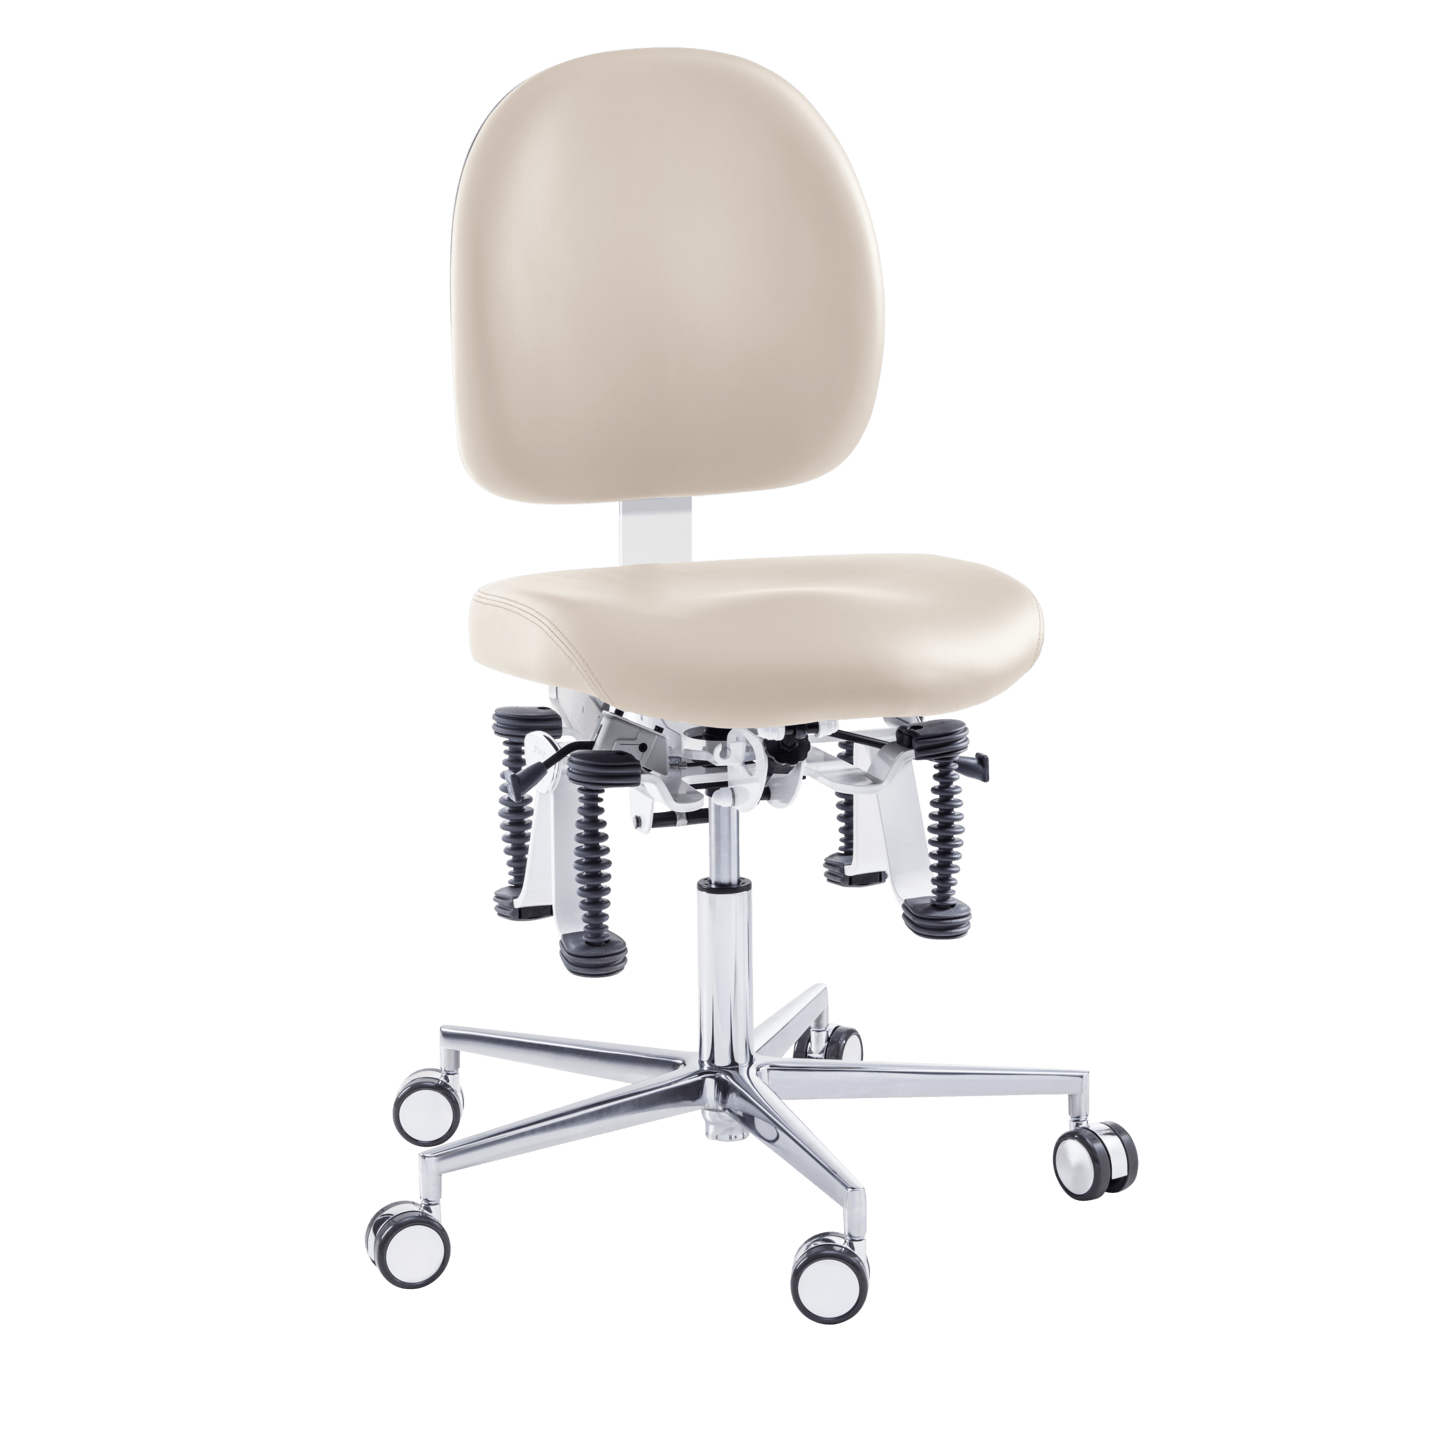 Bioswing - Bioswing Practitioner Chair in natural